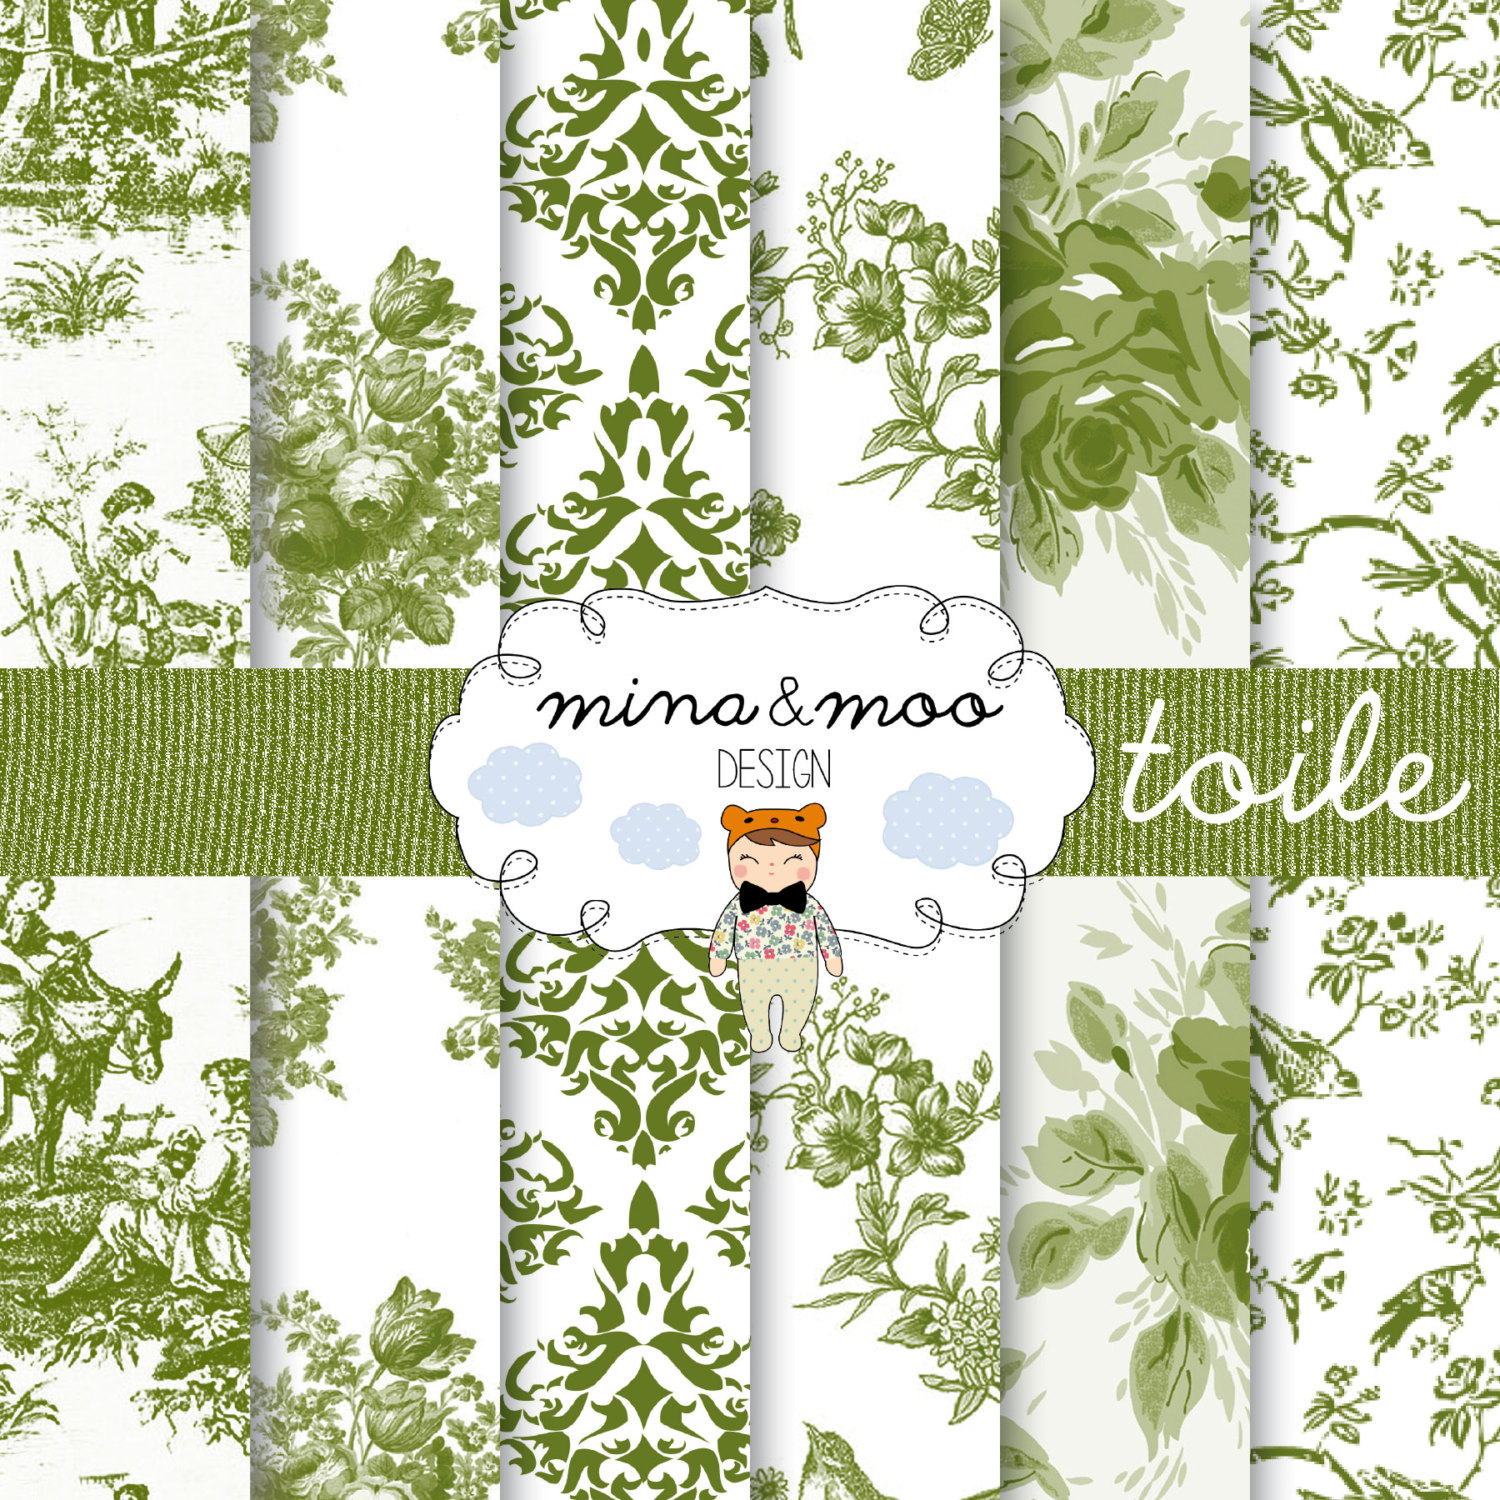 Popular items for toile wallpaper on Etsy